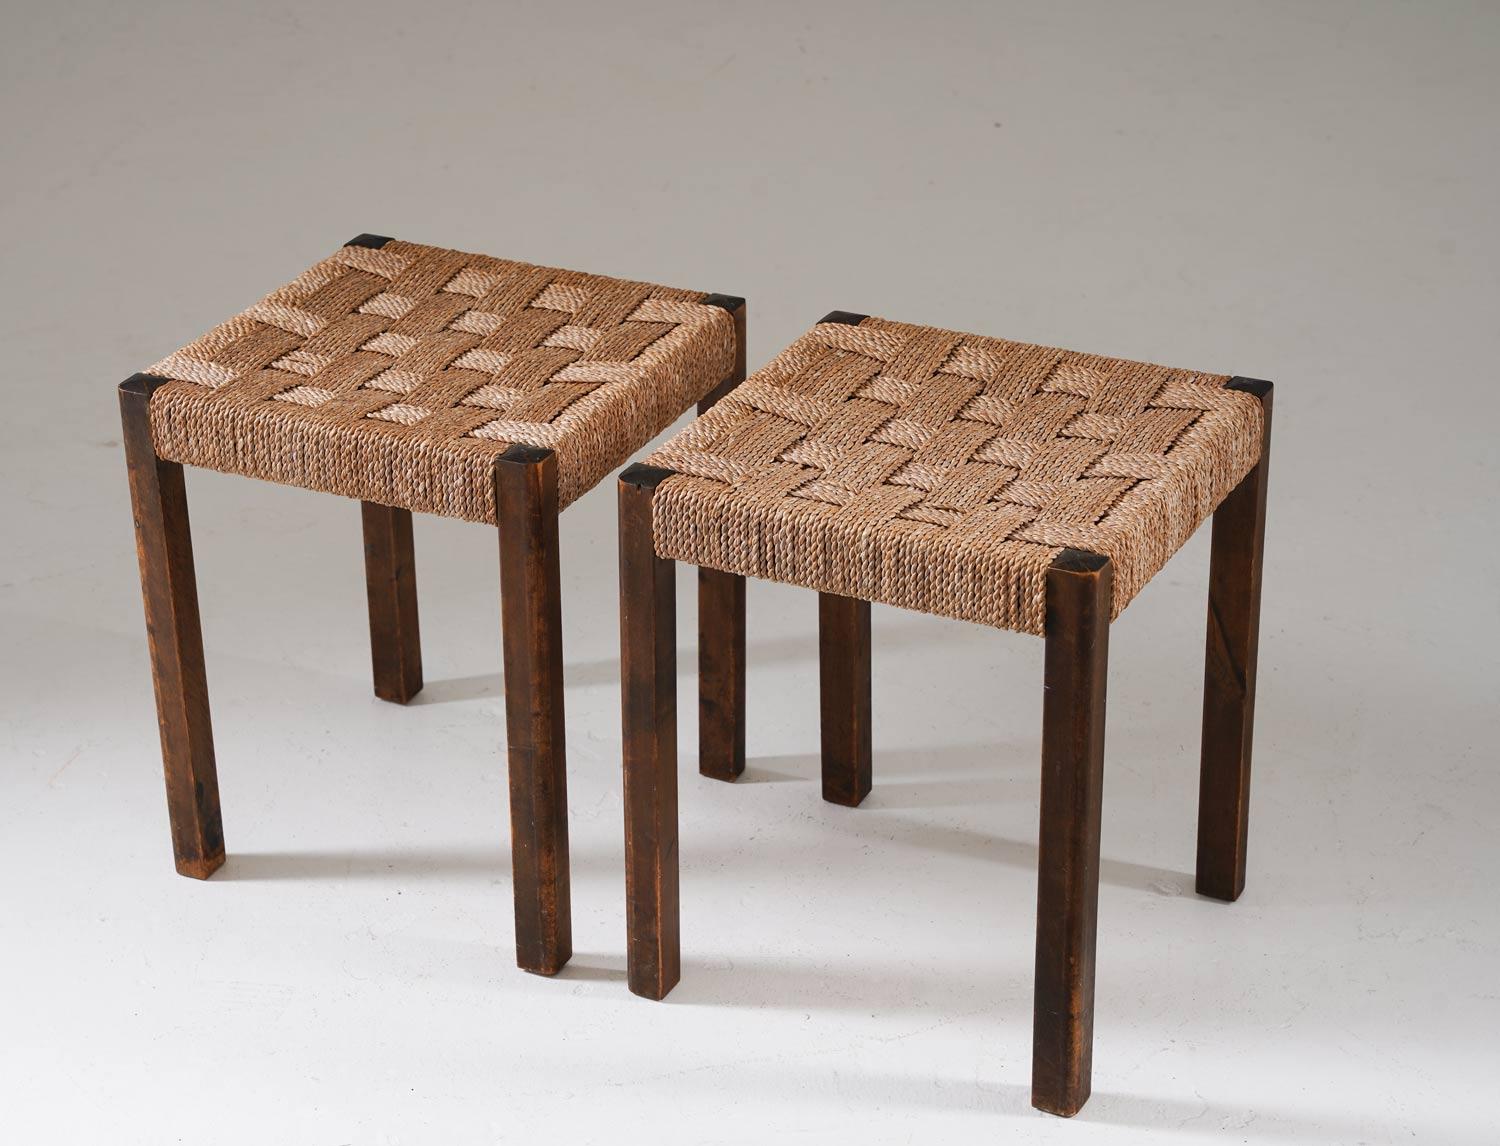 These Swedish modern stools designed by Axel Larsson for Bodafors in the 1930s offer a distinctive blend of craftsmanship and historical allure. Constructed from stained birch and featuring seagrass webbing, these stools epitomize the design